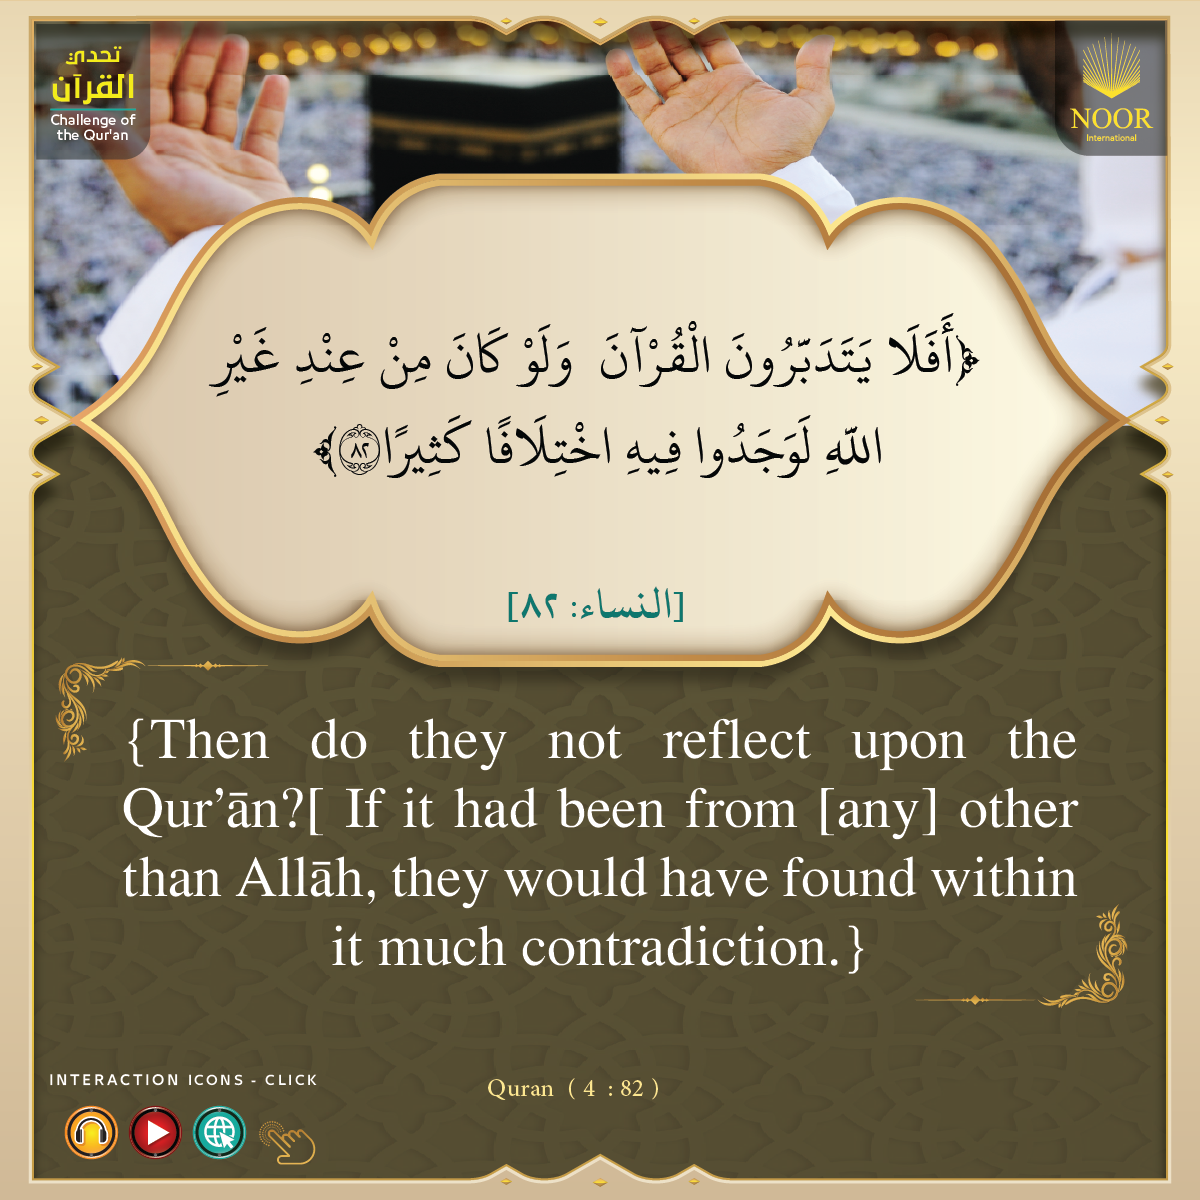 "Then do they not reflect upon the Quran?..."